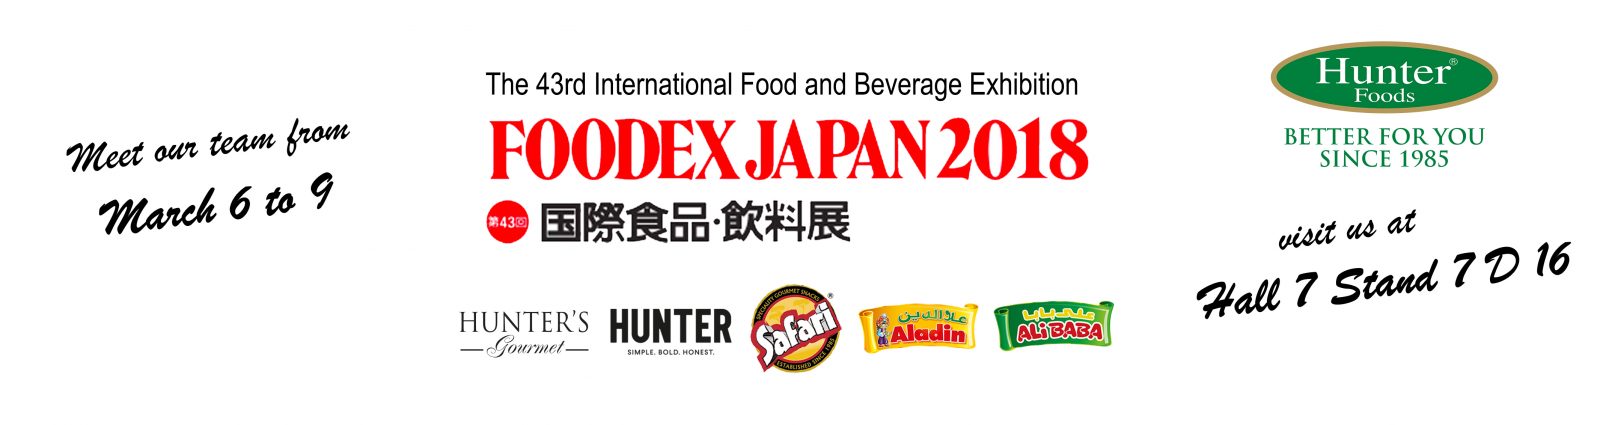 We are very excited to exhibit at FOODEX JAPAN 2018, from the 6th of March 2018 until the 9th of March 2018.